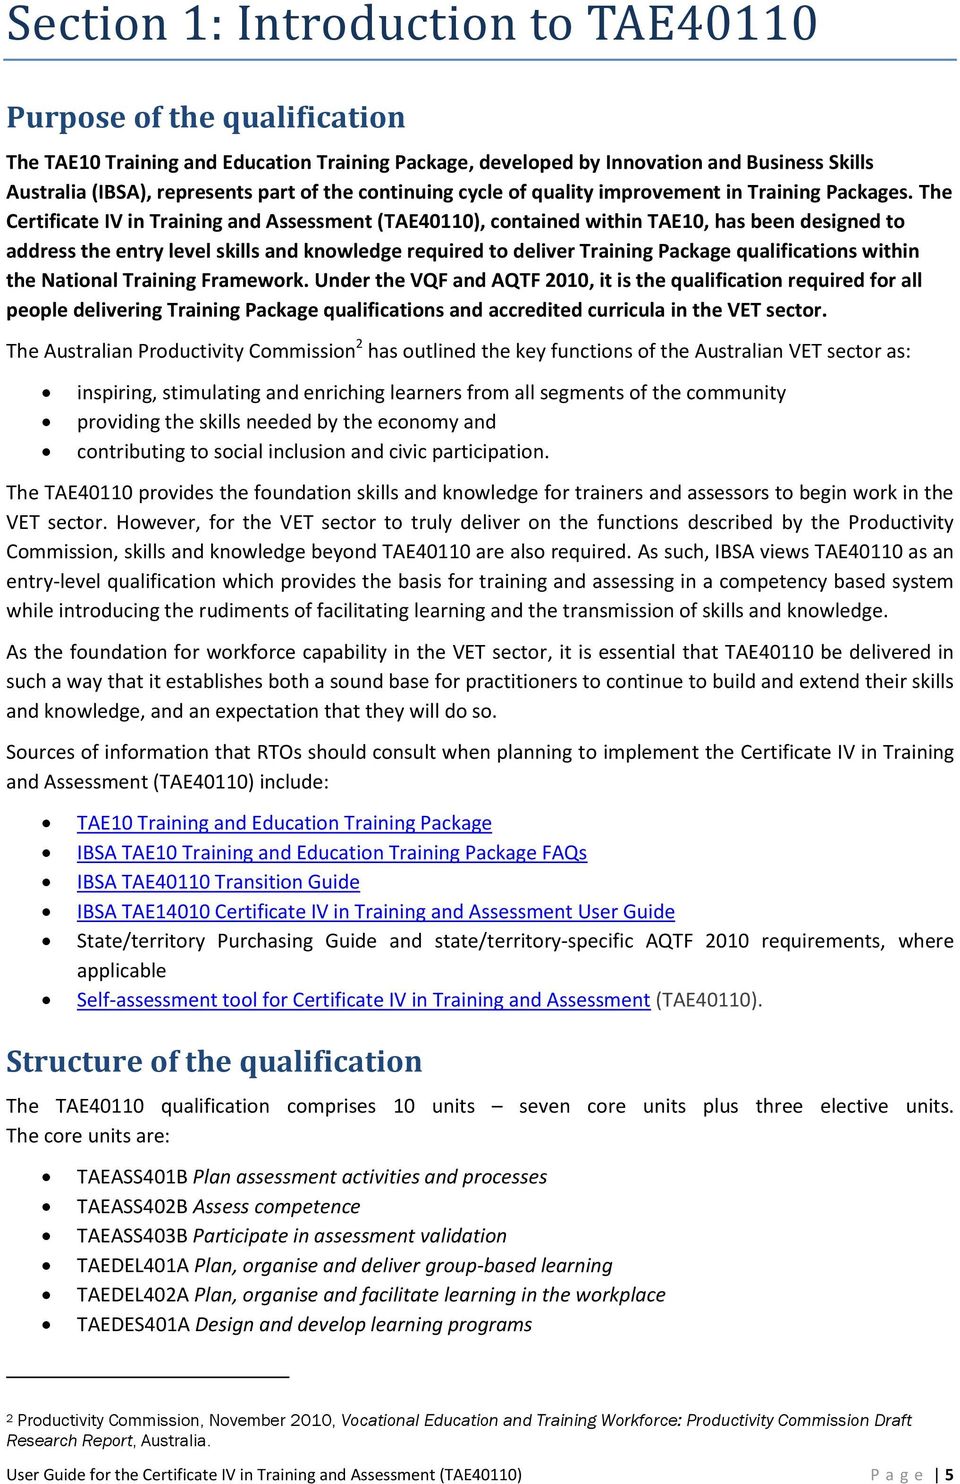 The Certificate IV in Training and Assessment (TAE40110), contained within TAE10, has been designed to address the entry level skills and knowledge required to deliver Training Package qualifications